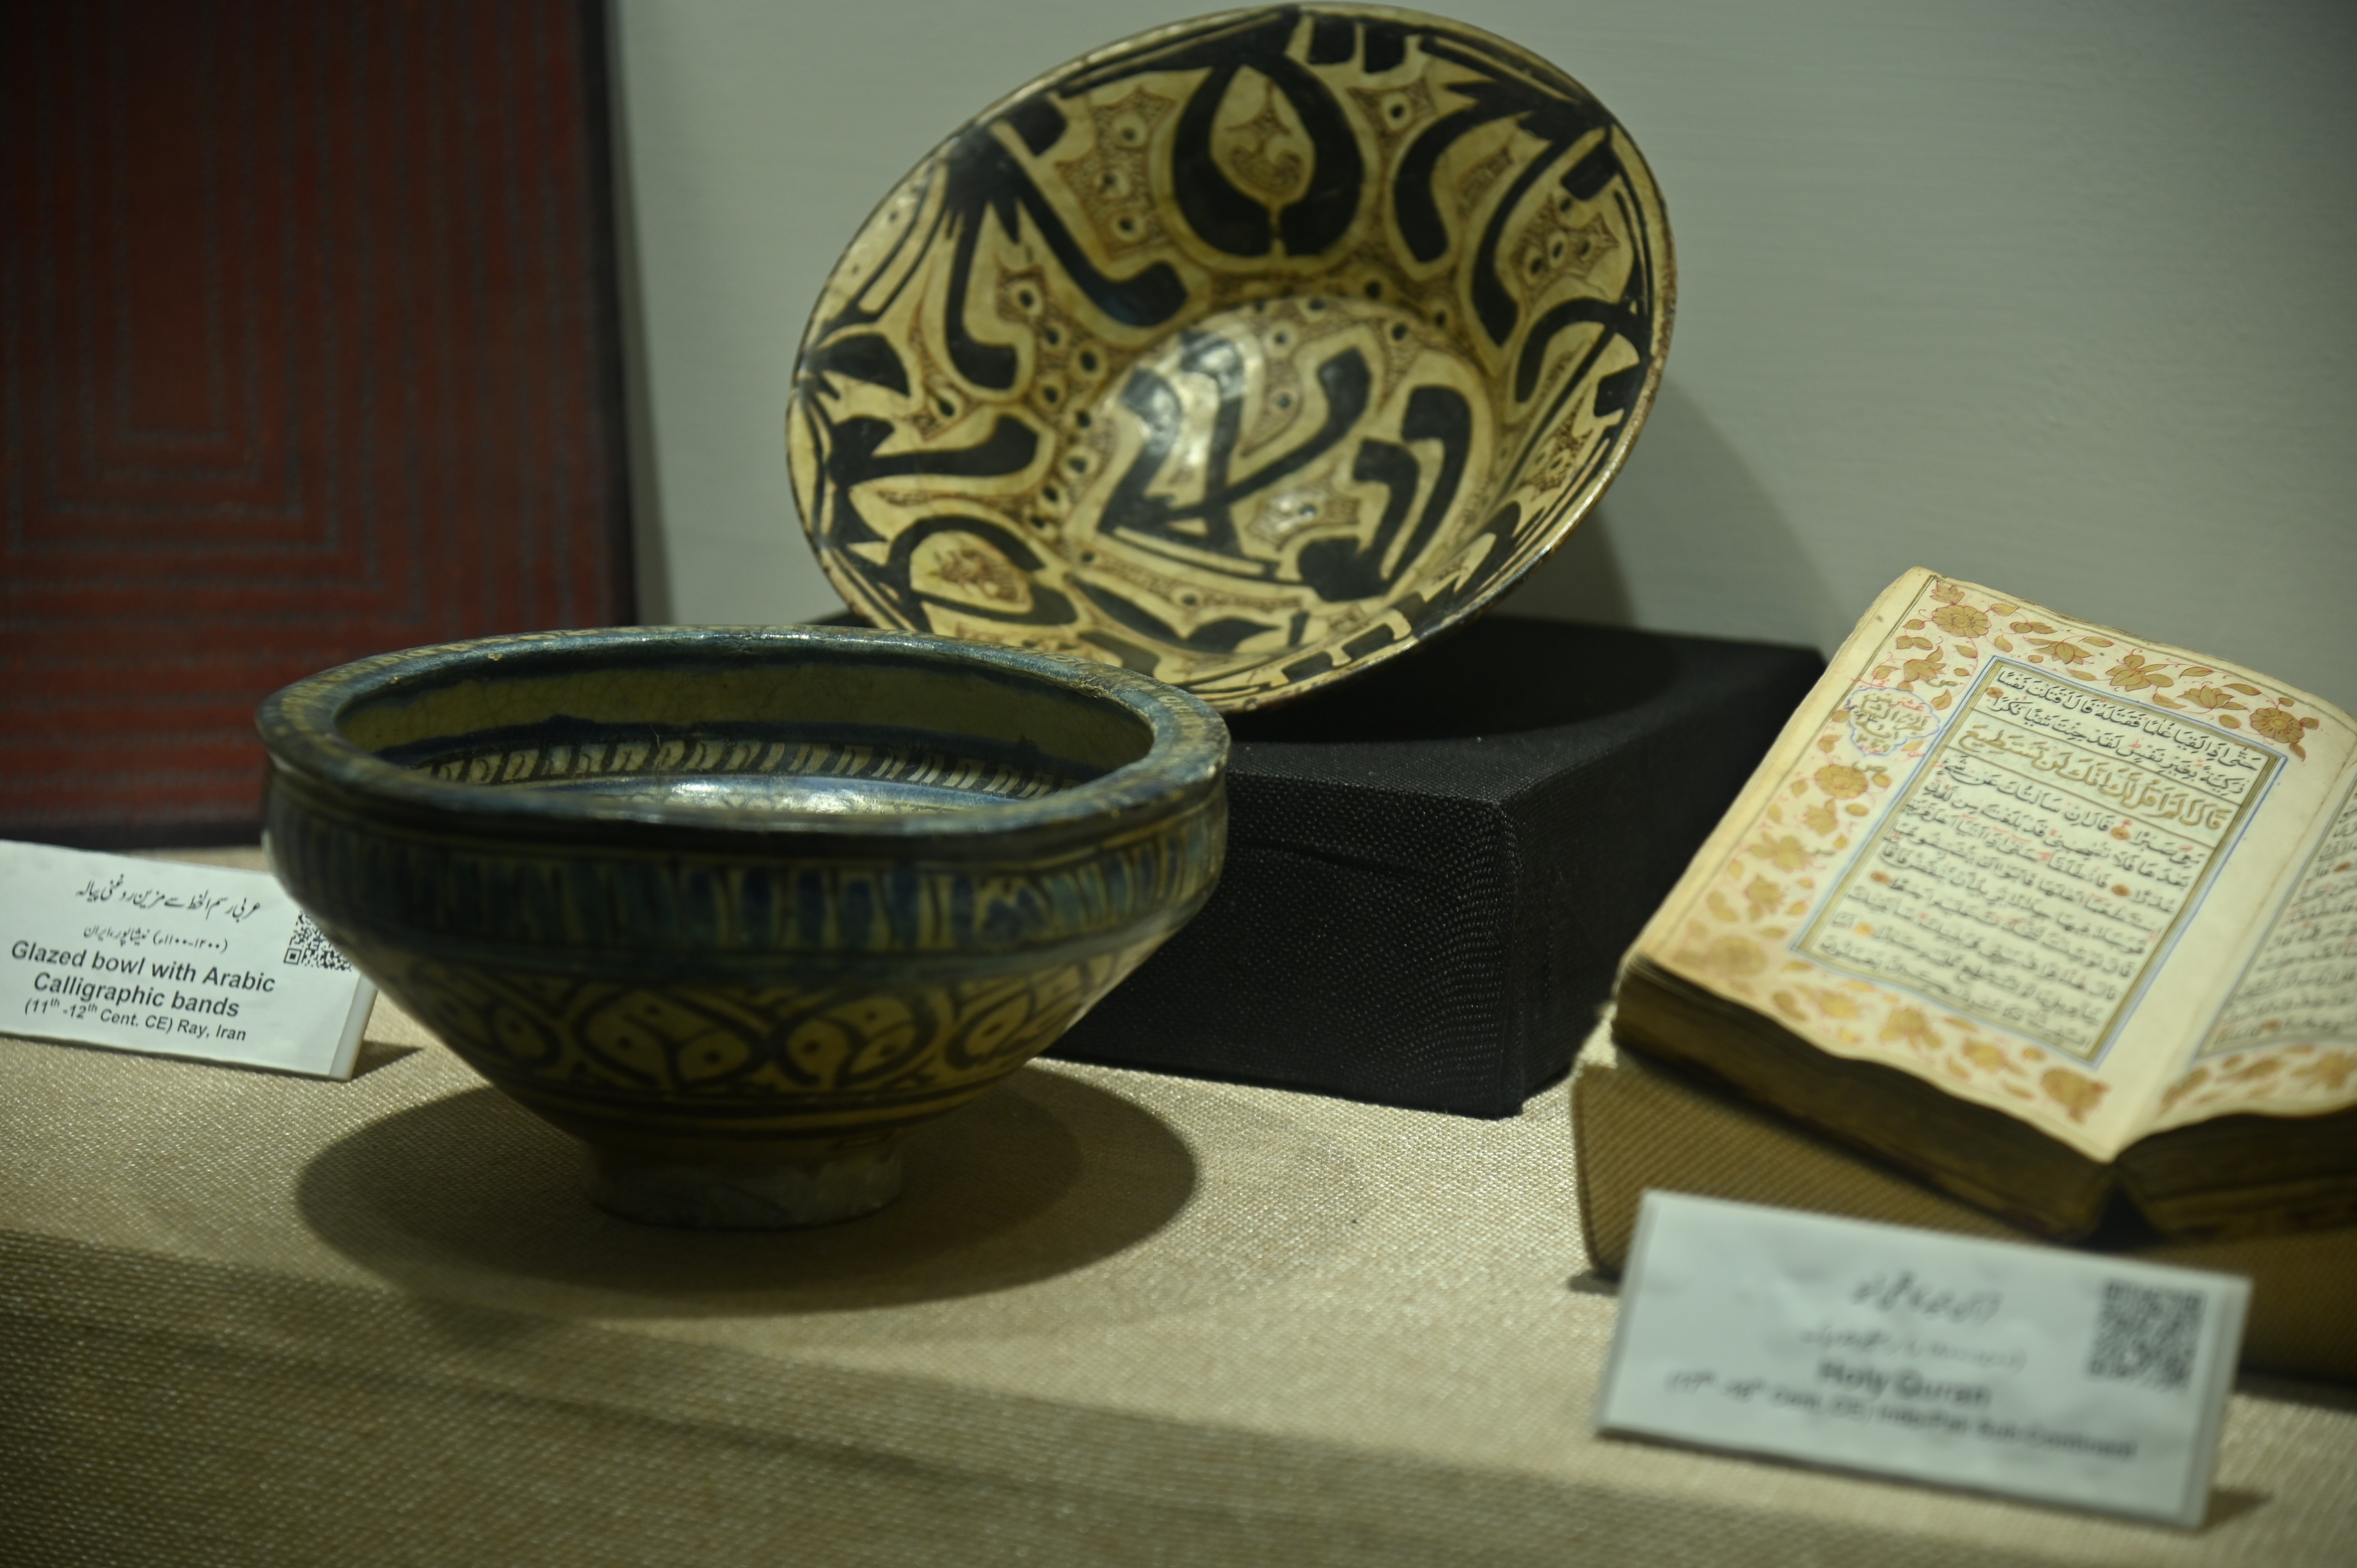 The Glazed Bowl with Arabic Calligraphy Bands